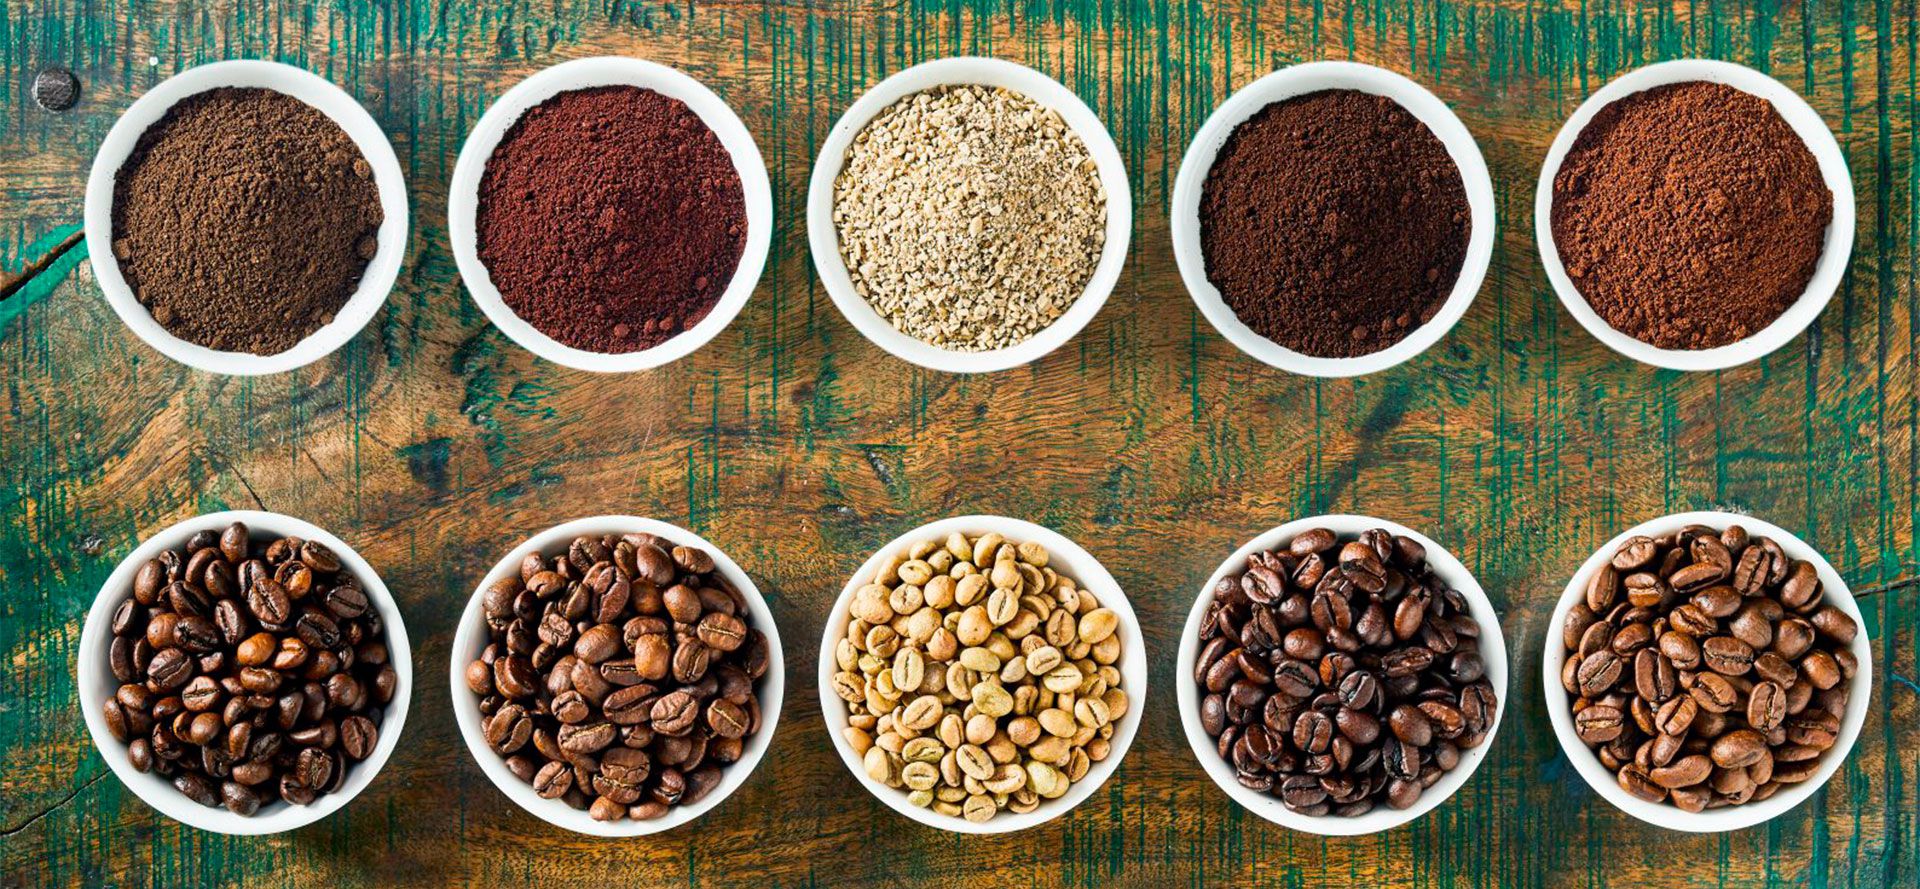 Ground Different Types of Coffee.